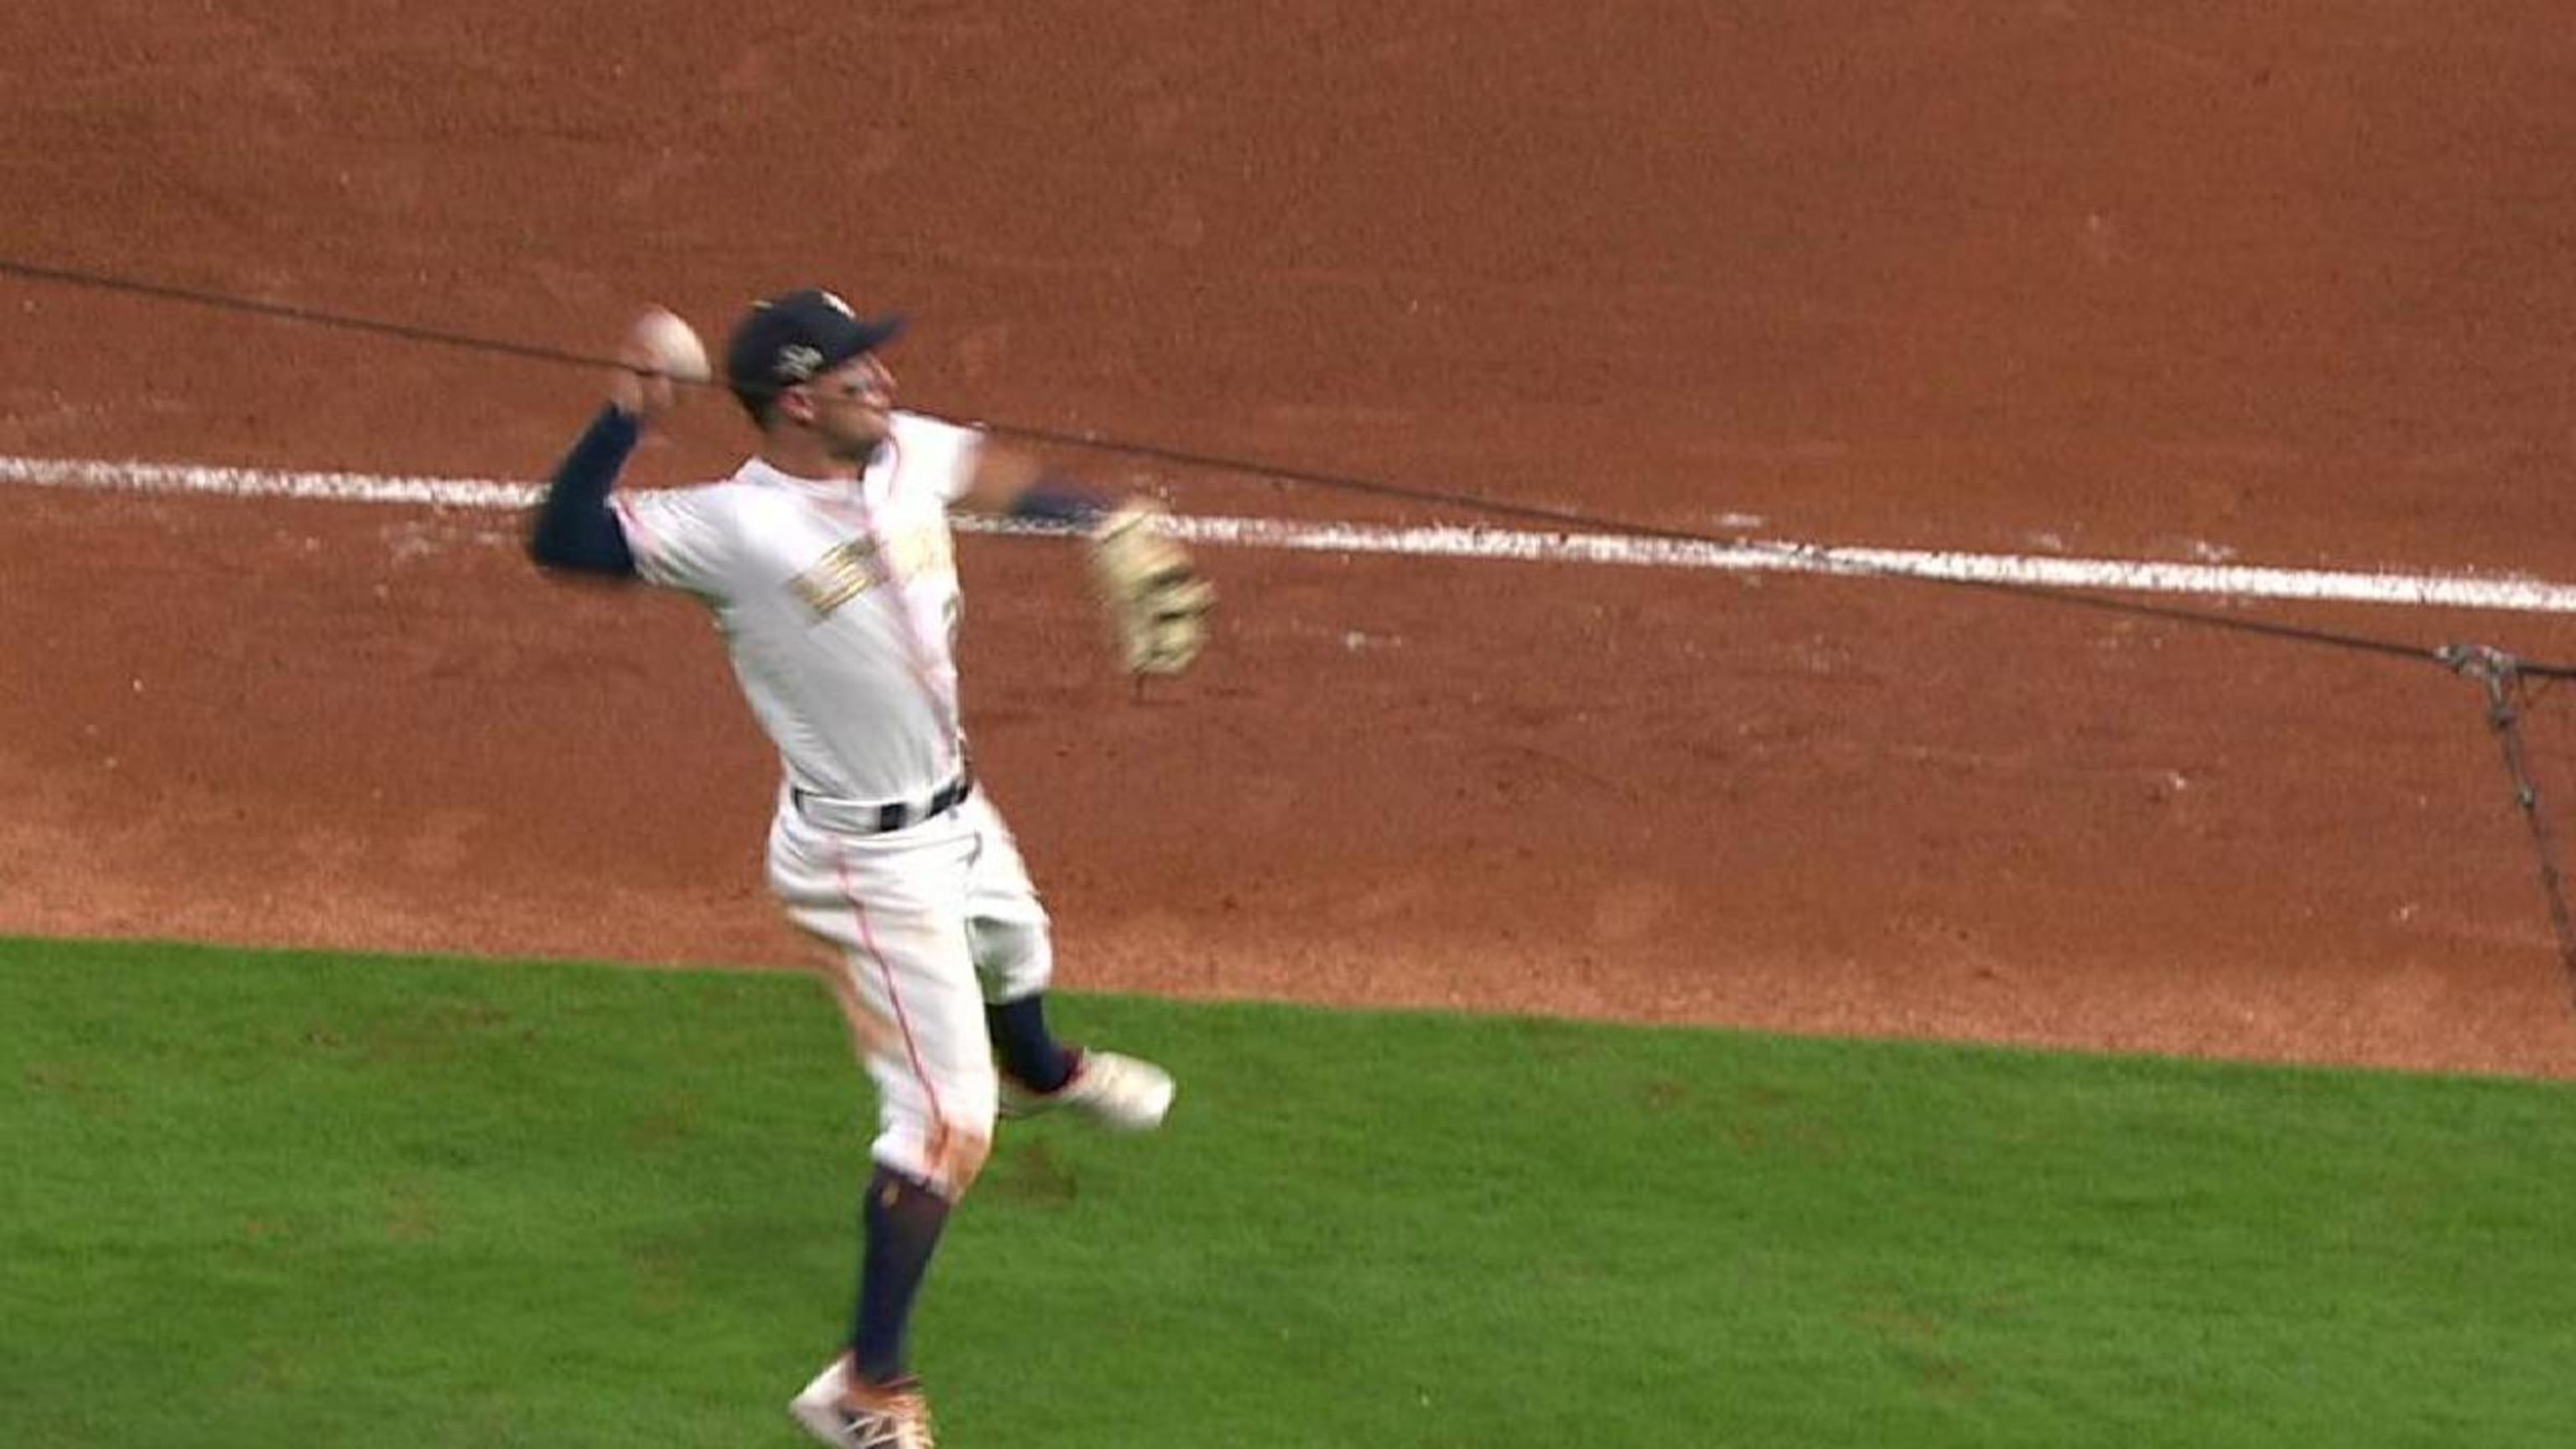 VIDEO, GIF: Jackie Bradley Jr. turns great catch-and-throw double